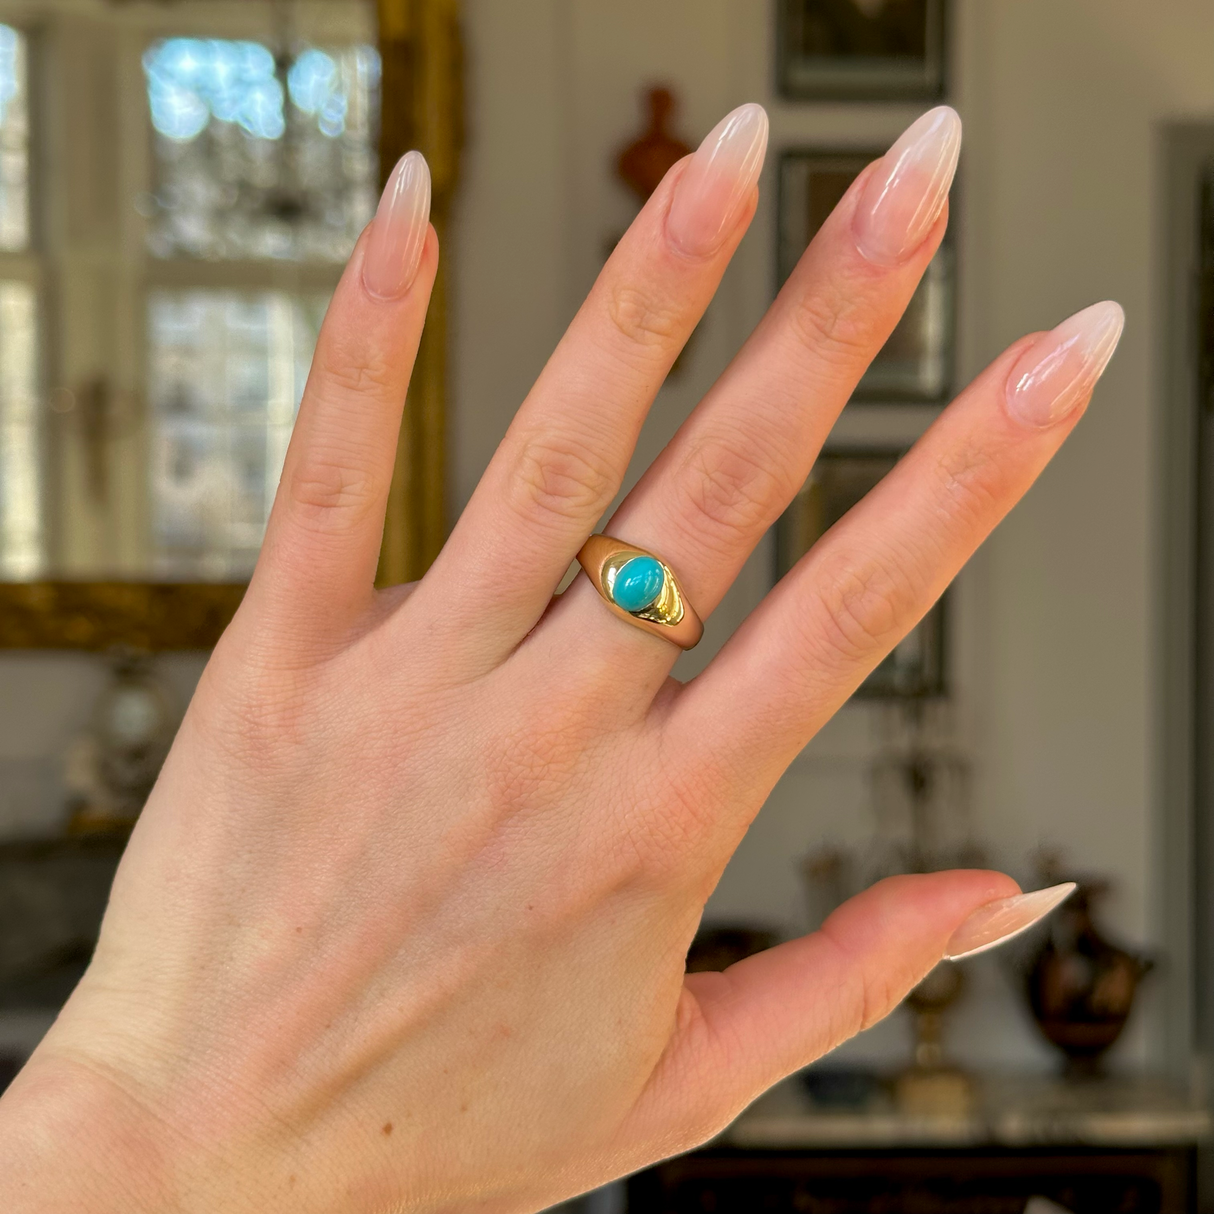 Antique, Single-Stone Turquoise Gypsy Ring, 18ct Yellow Gold worn on hand. 